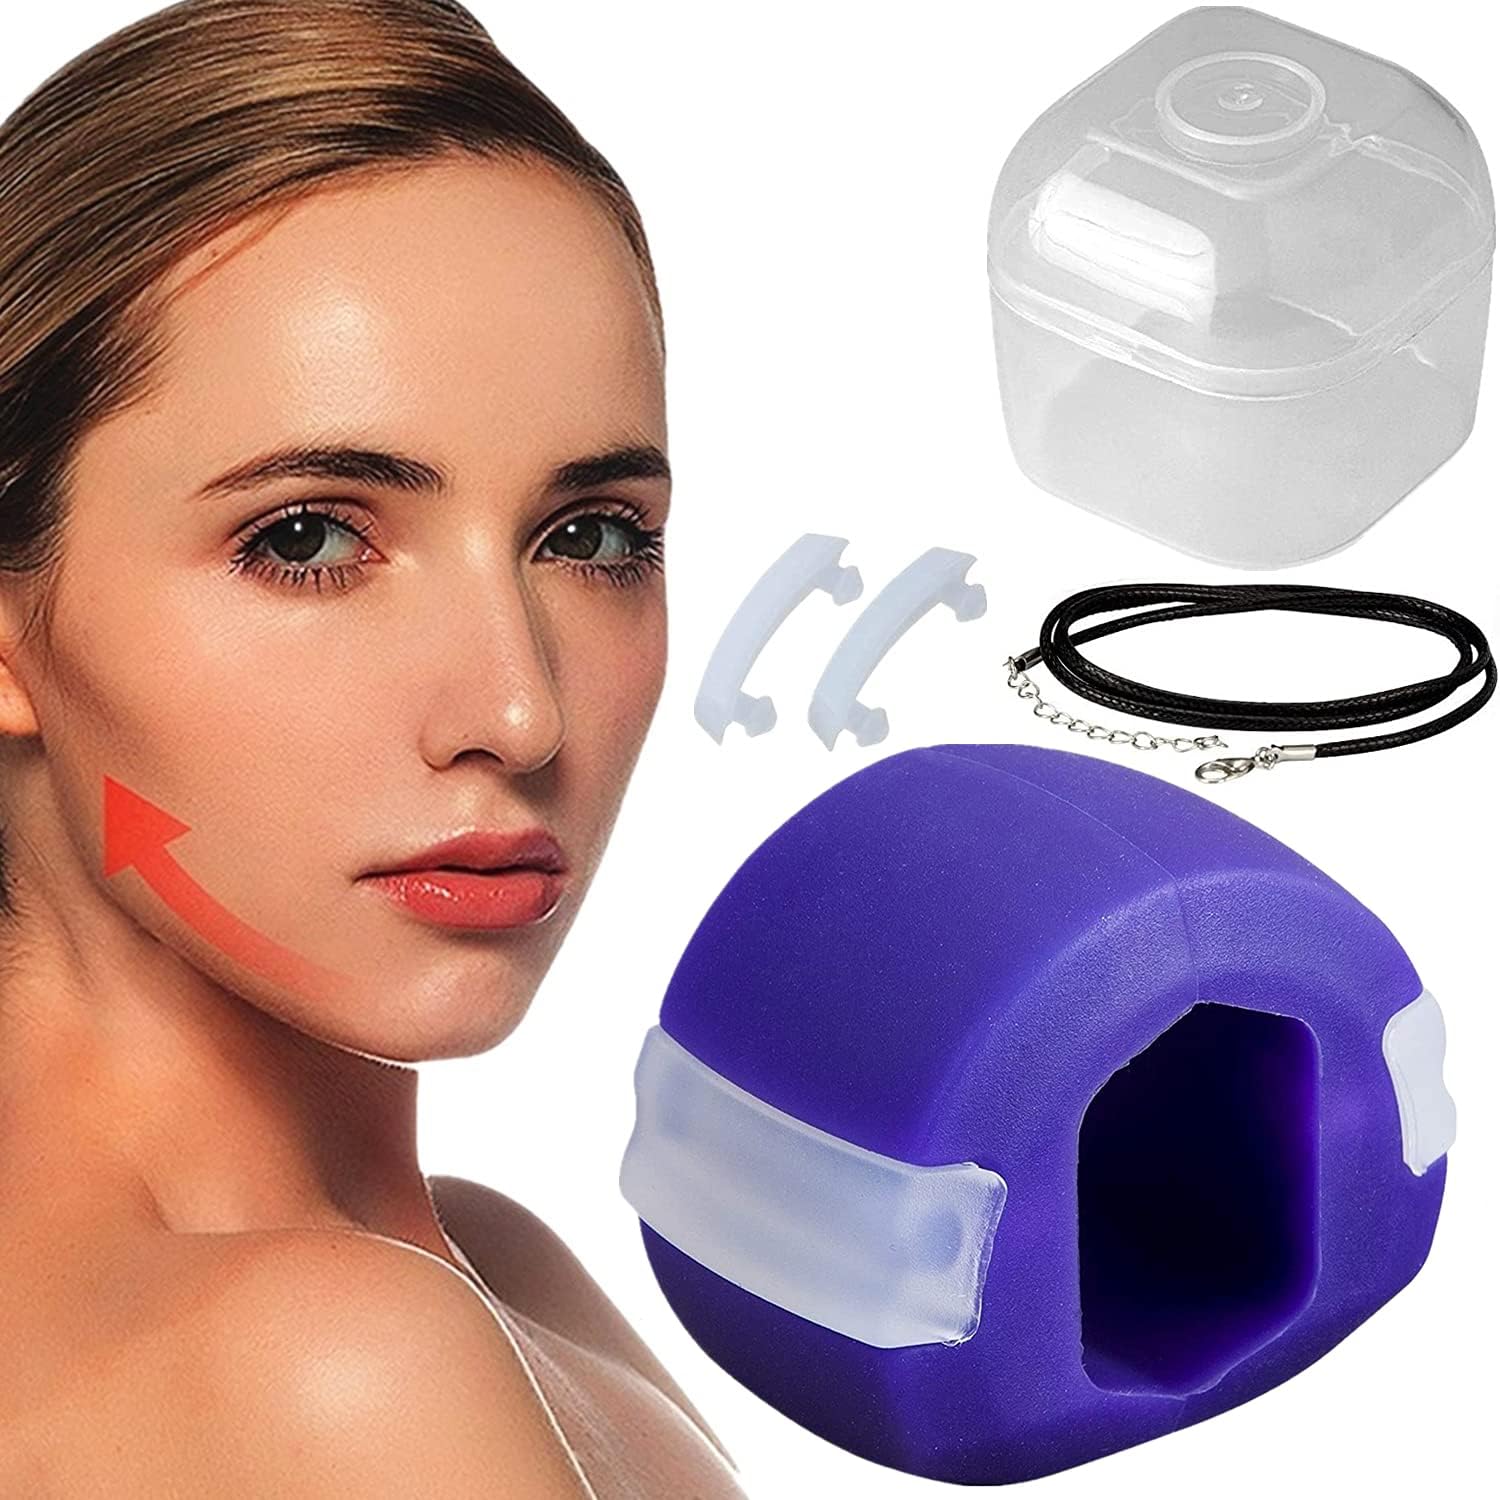 Jaw Exerciser Chew Double Chin Reducer, Men Women Jawline Trainer, Face Fitness Ball Neck Exerciser, Food Grade Silicone Jawline Exerciser With 2 Extra Bite Strips, 1 Storage Box, 1 Lanyard